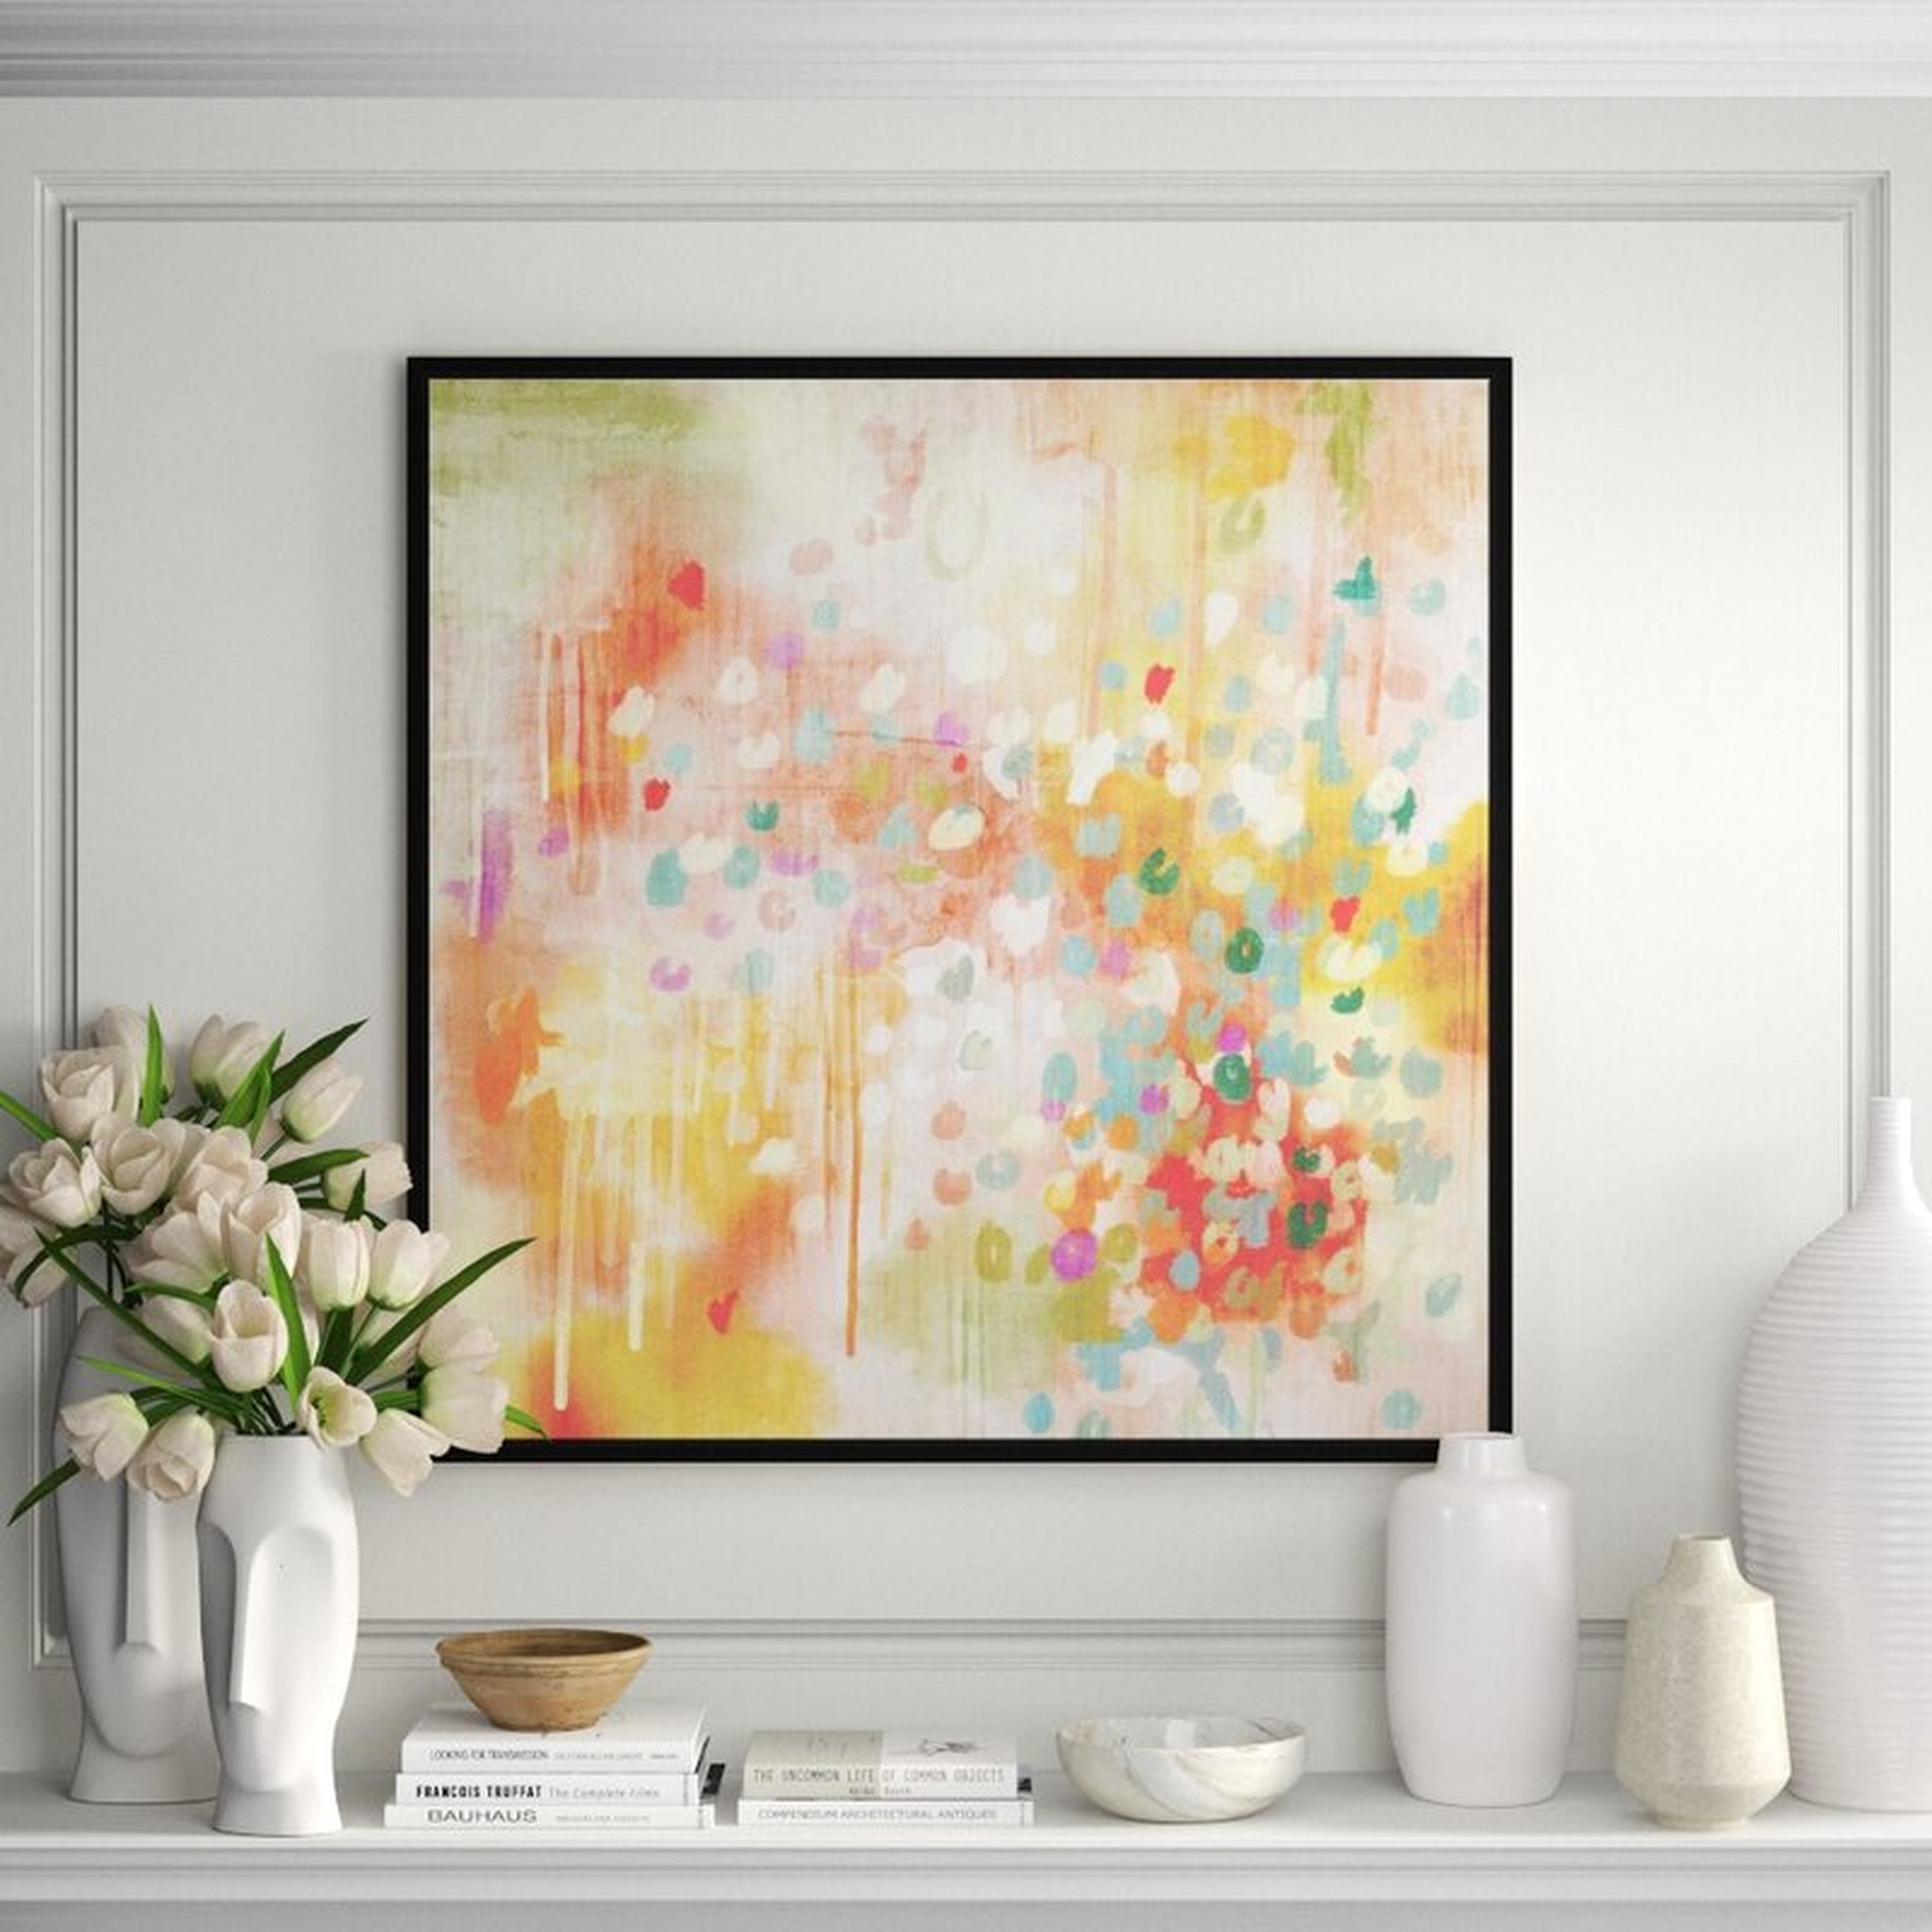 JBass Grand Gallery Collection Colorful I Love You - Painting on Canvas - Perigold